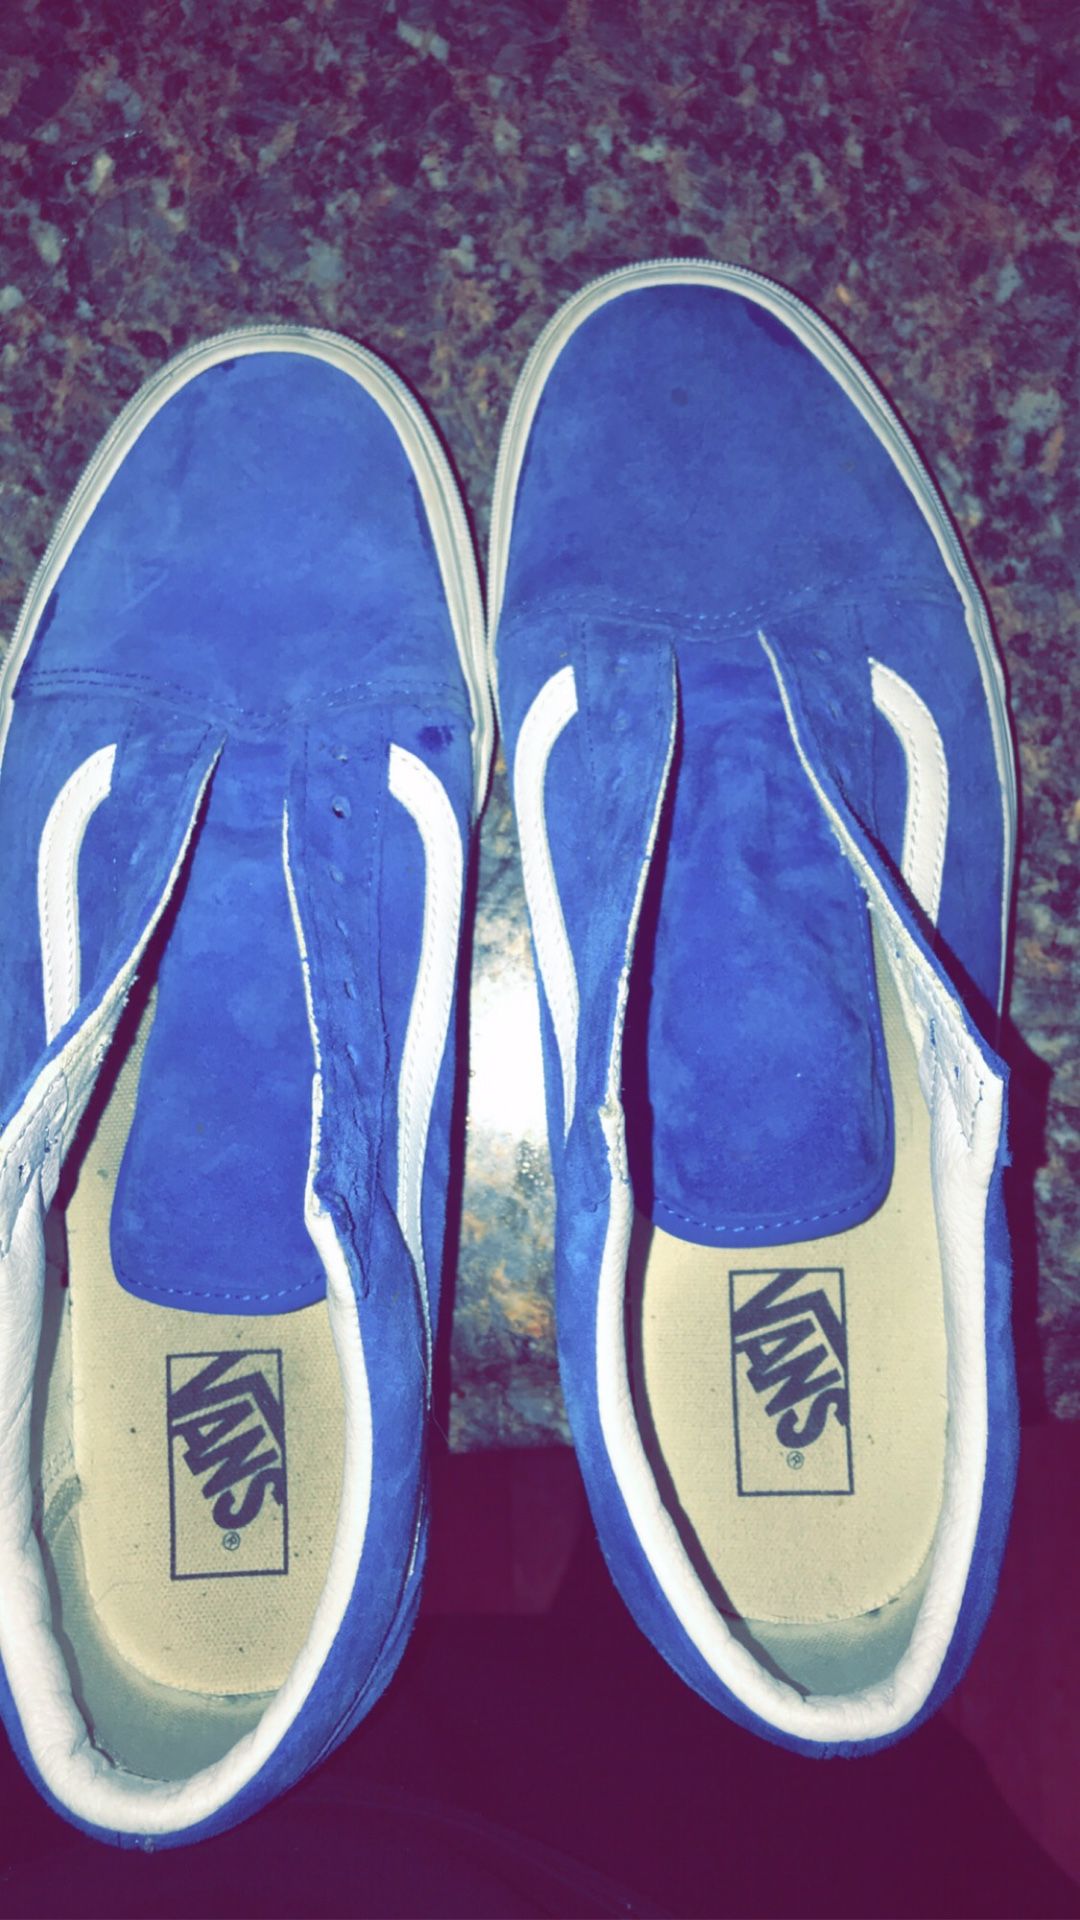 Blue vans size 11.5 comes with fresh white laces worn 4 times good condition